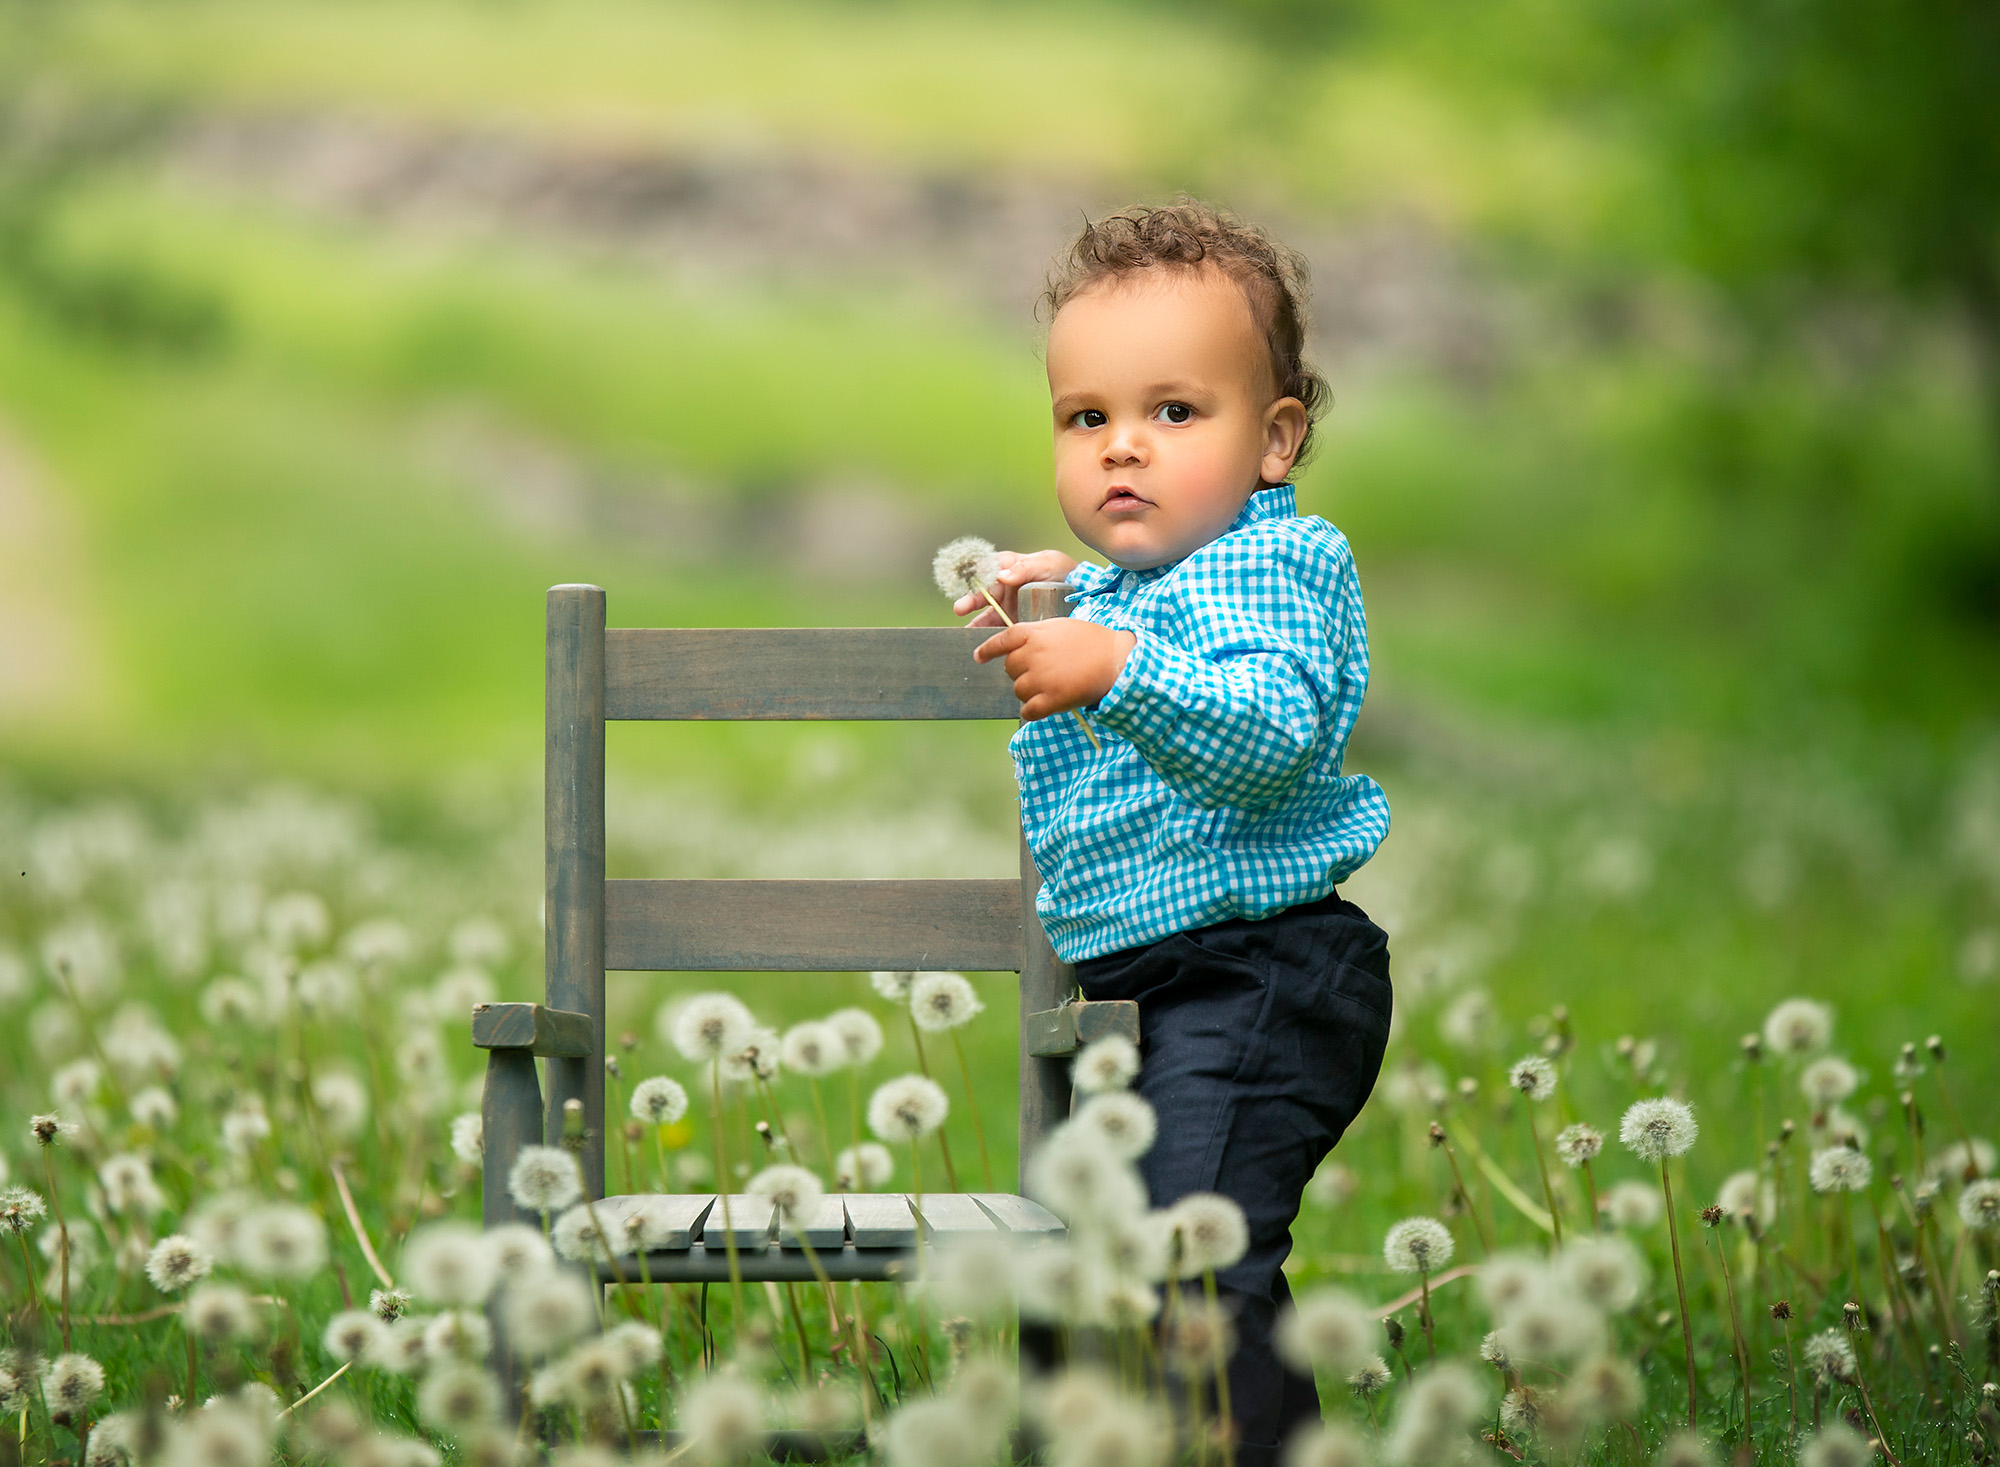 Stunning Summer Outdoor Family Photos one year old boy posing with rustic chair in dandelion field holding a dandelion